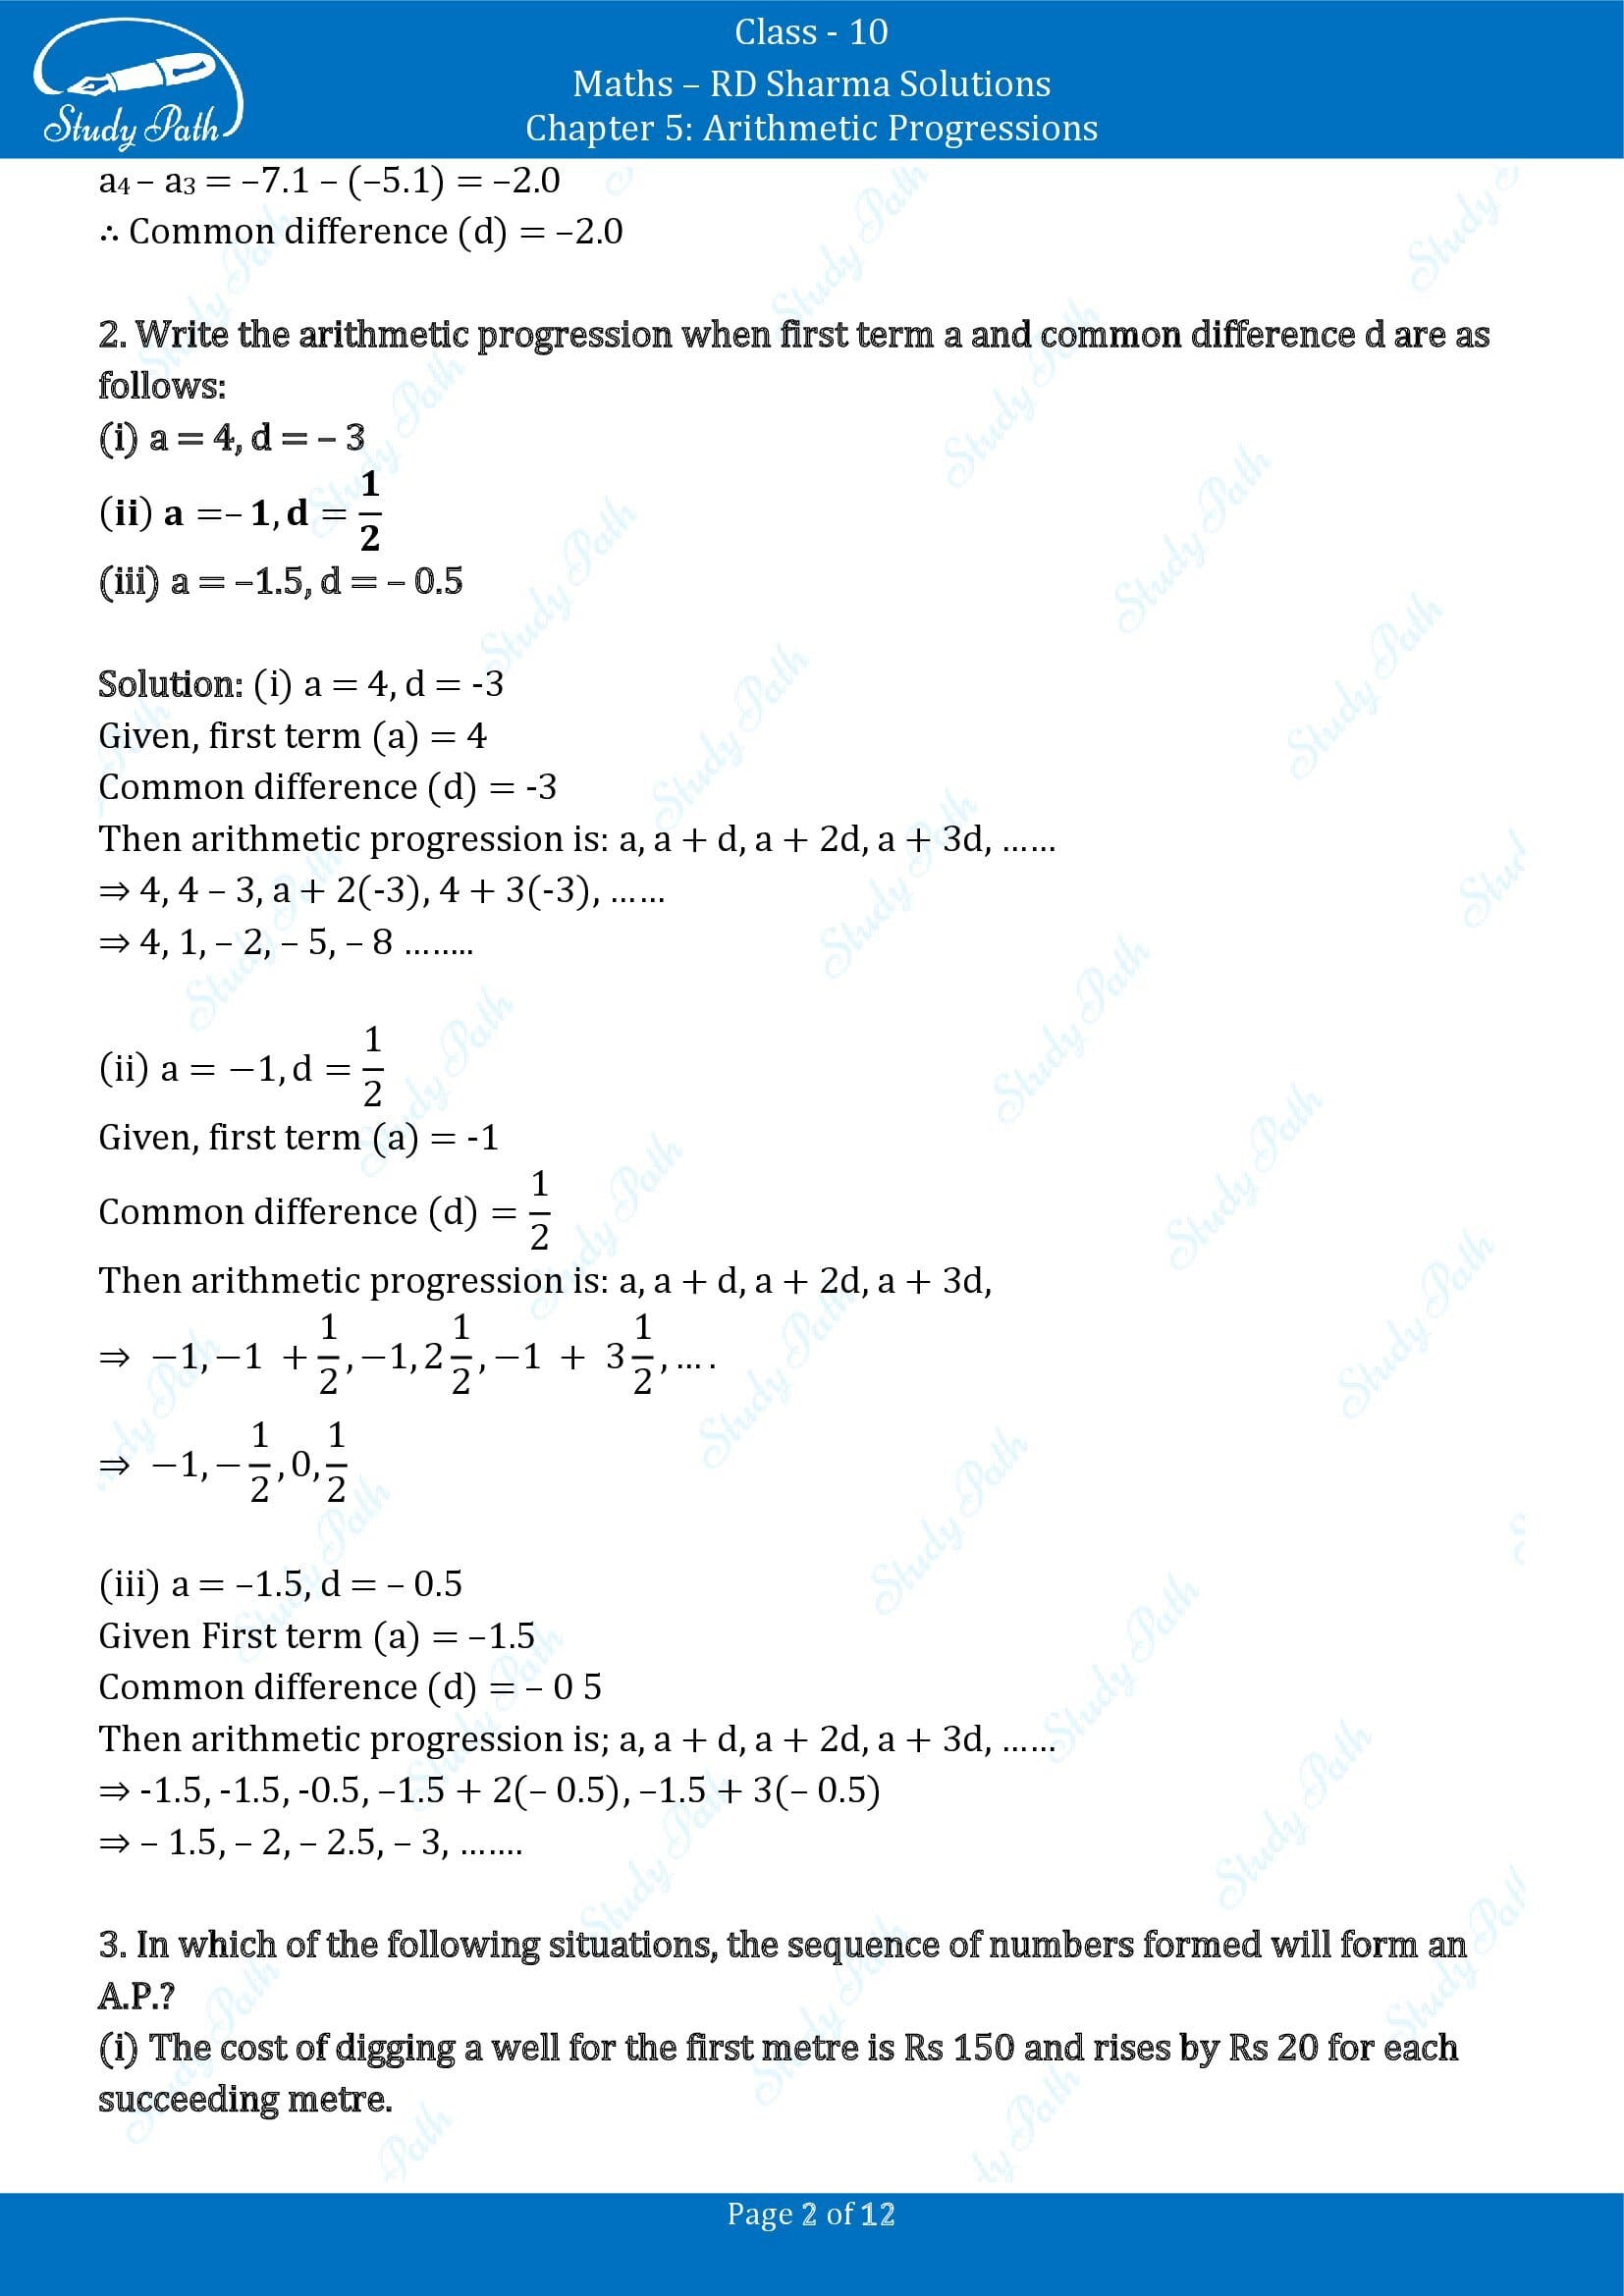 RD Sharma Solutions Class 10 Chapter 5 Arithmetic Progressions Exercise 5.3 00002